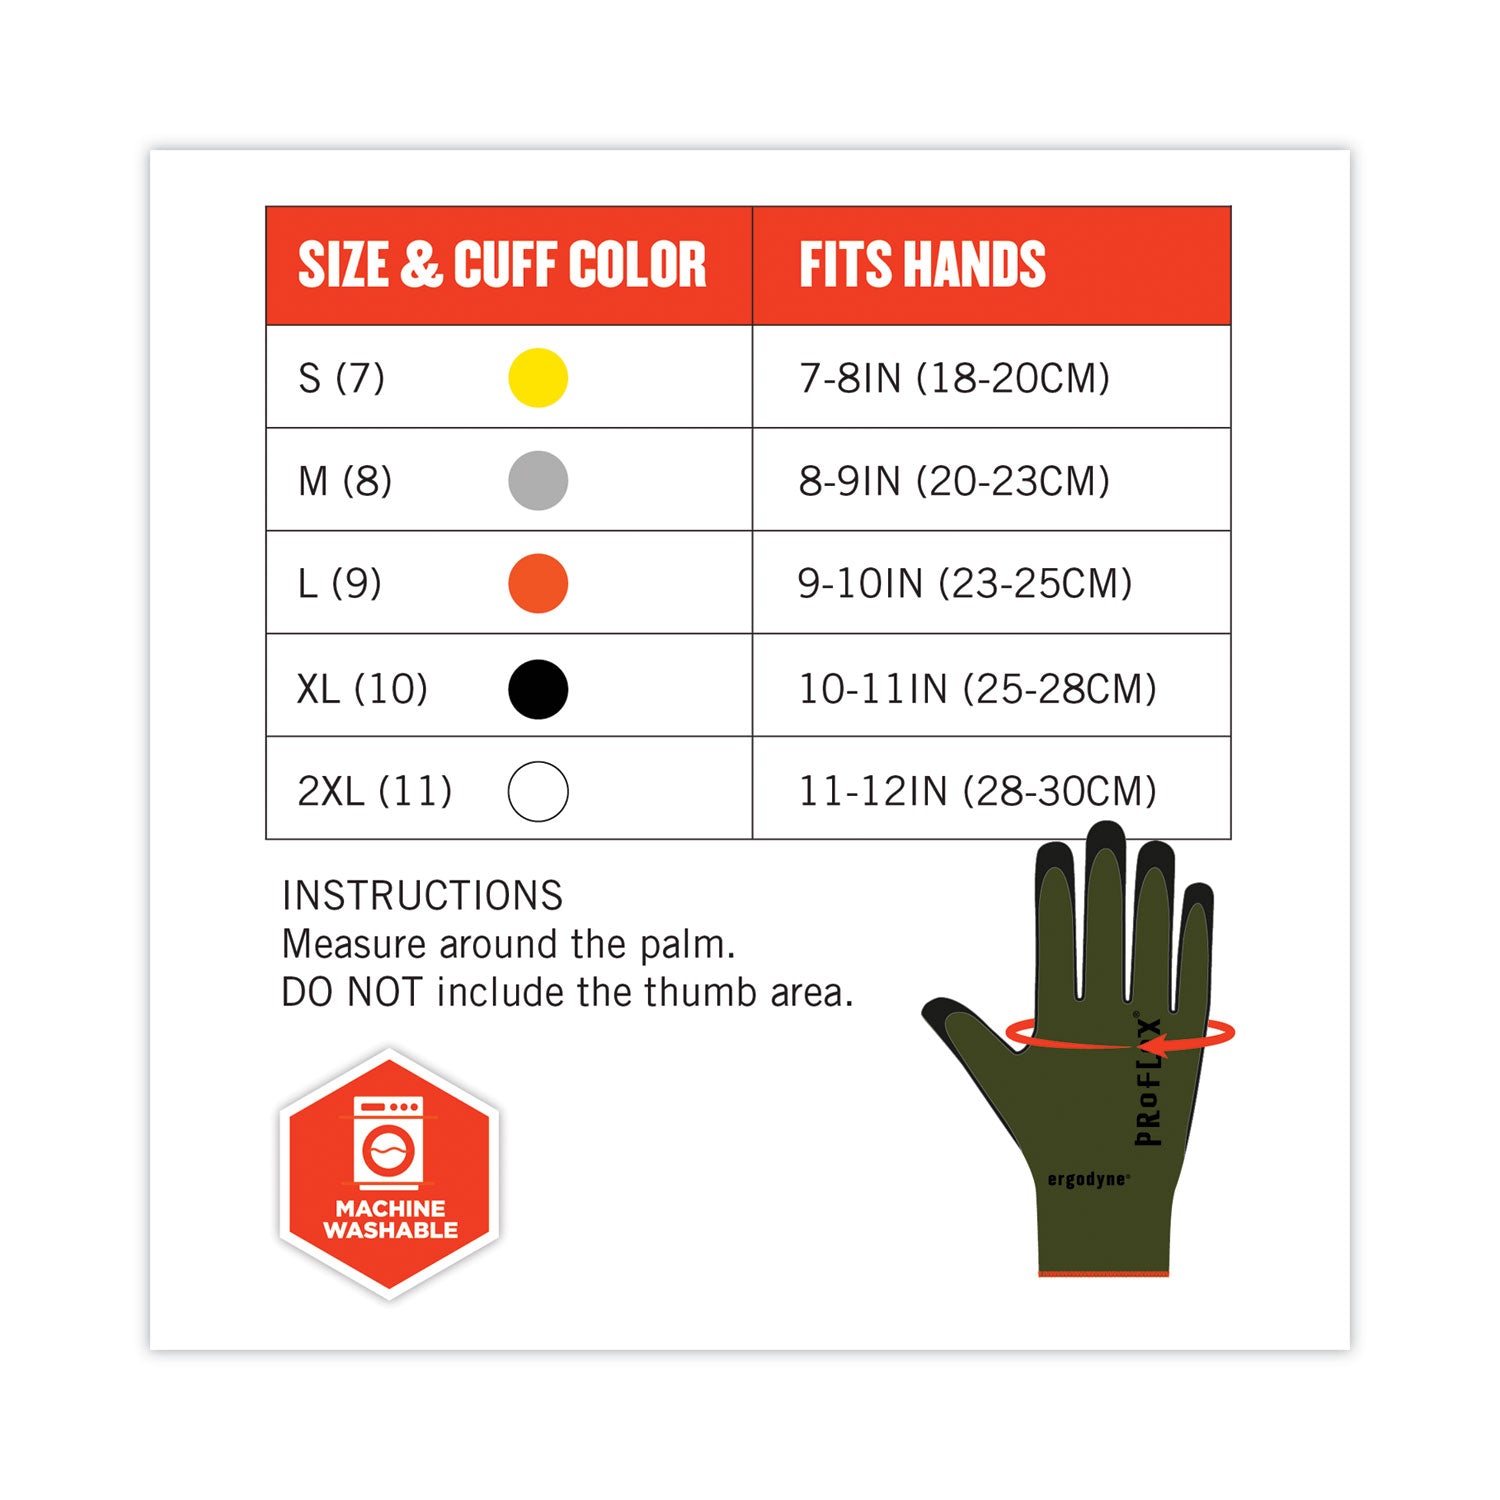 proflex-7042-ansi-a4-nitrile-coated-cr-gloves-green-large-pair-ships-in-1-3-business-days_ego10344 - 5